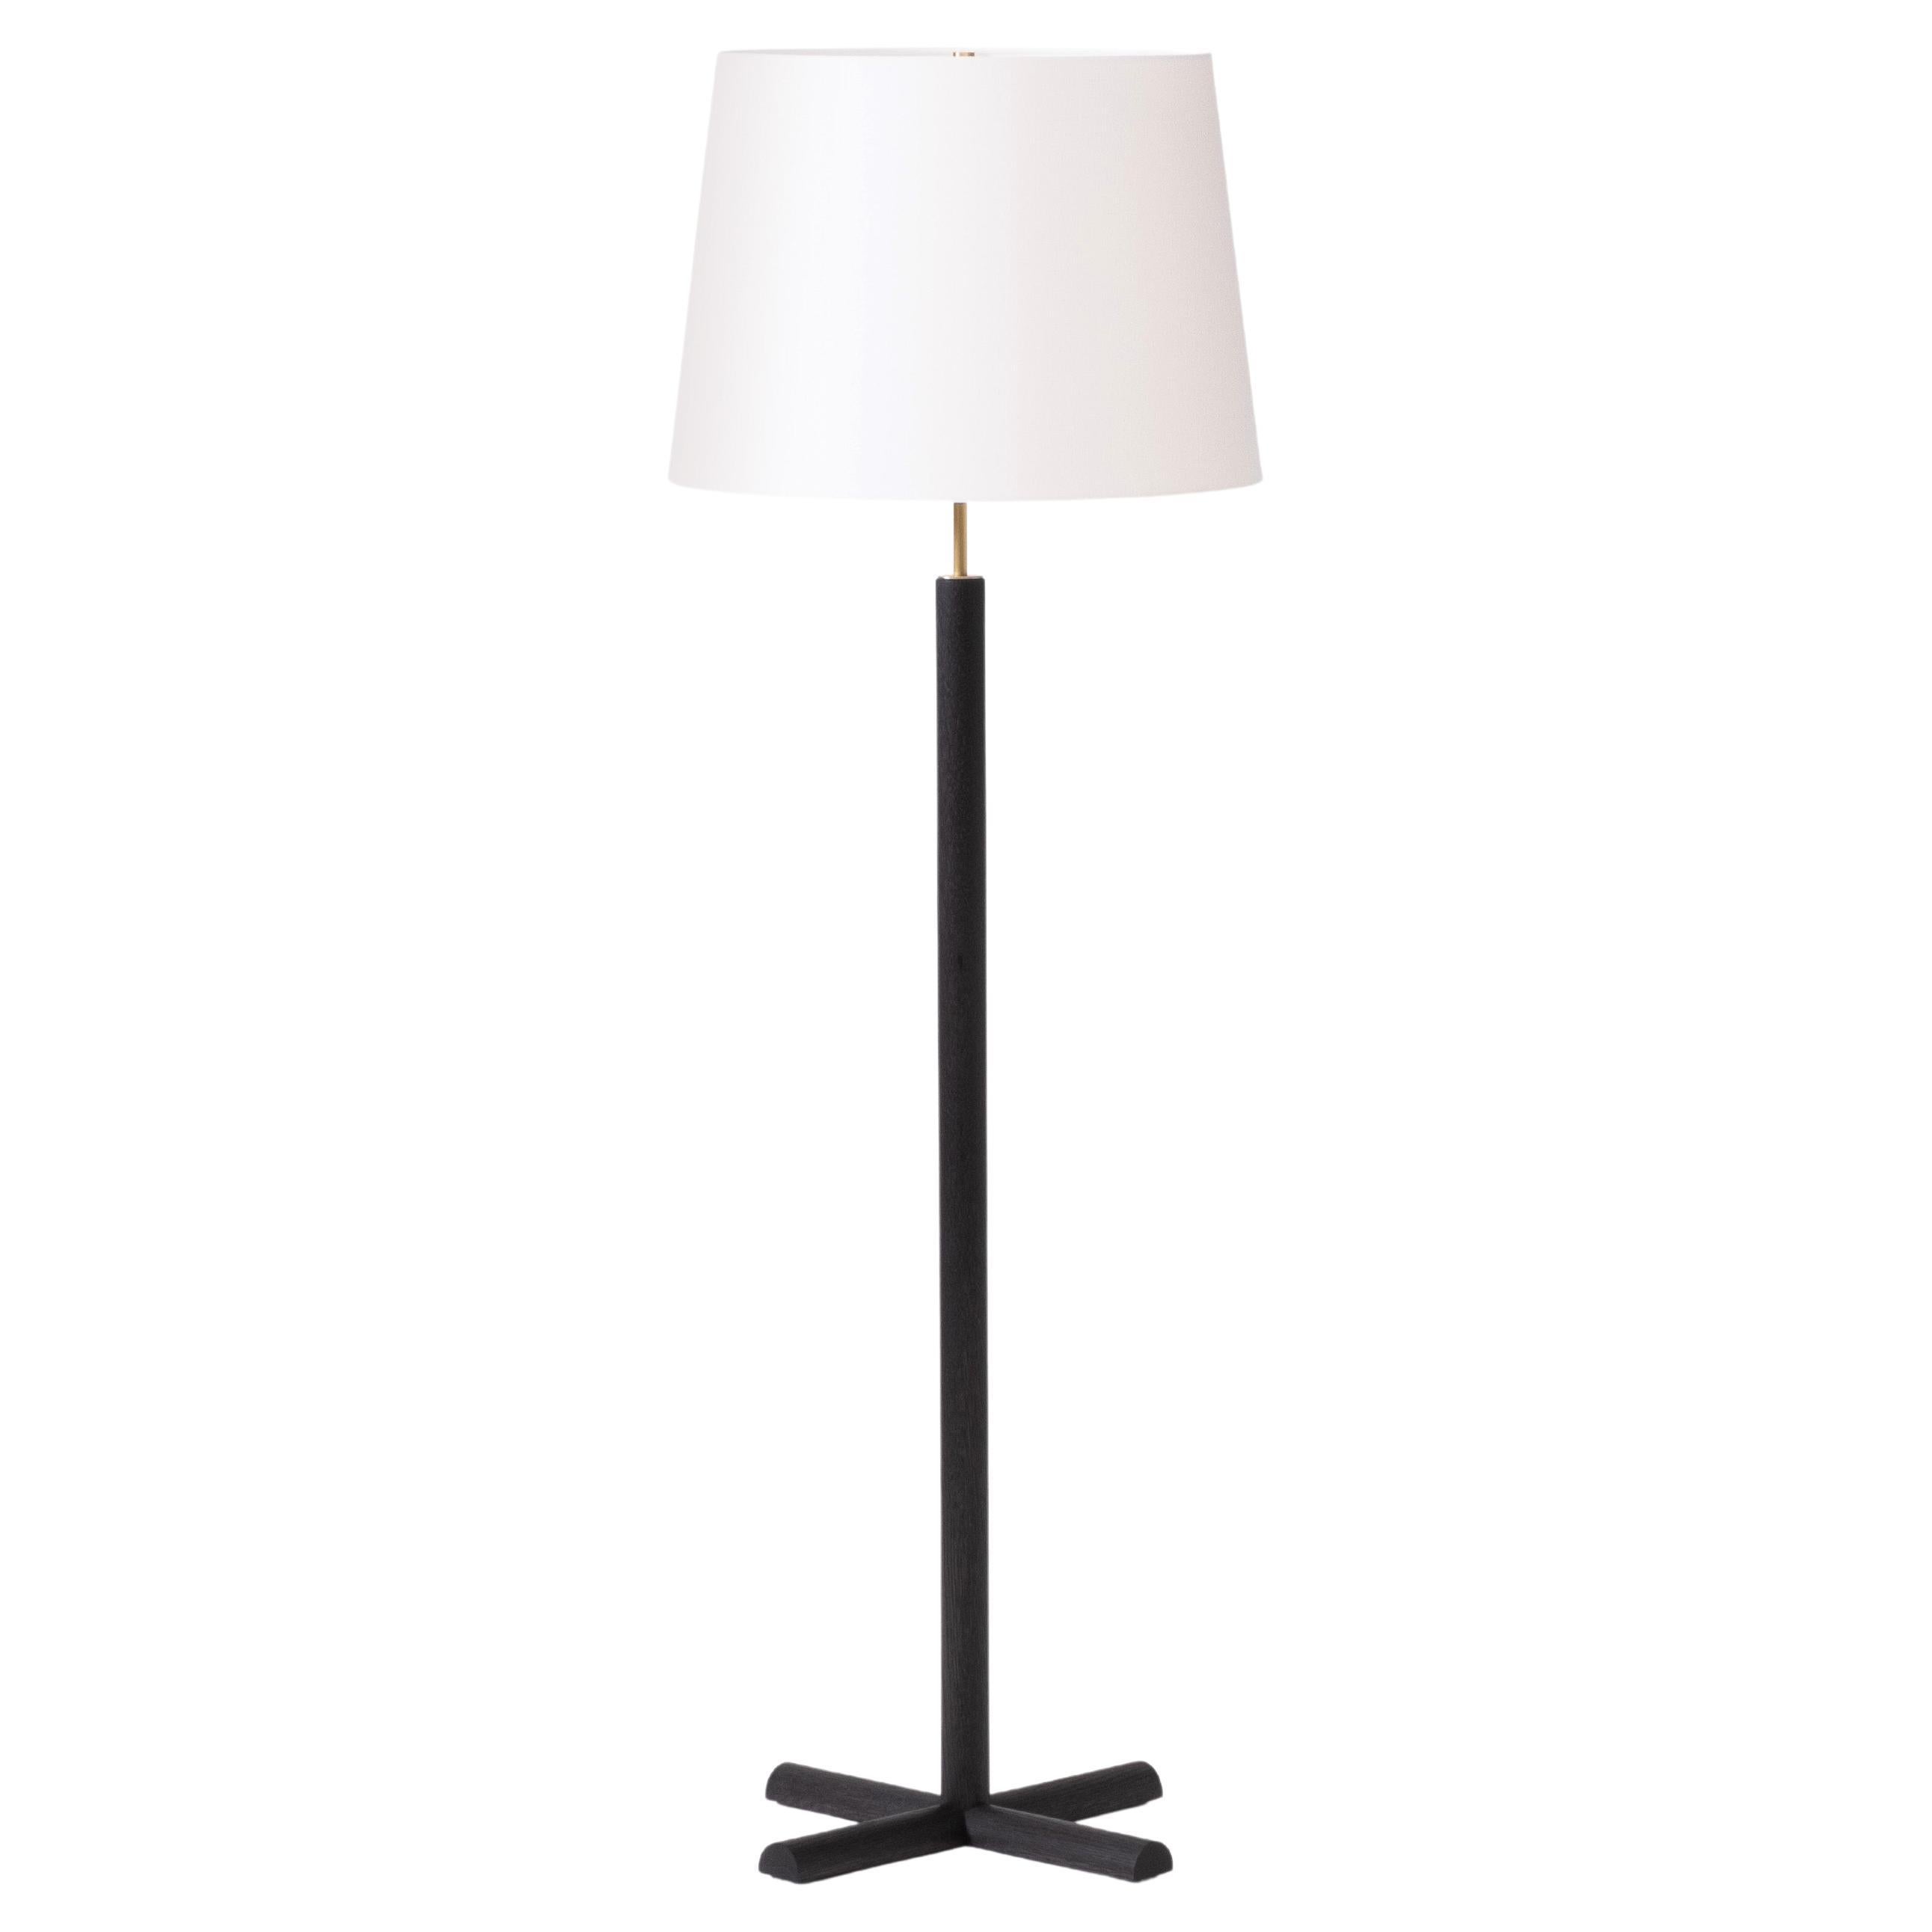 Modern Floor Lamp with Blackened Oak Column Base and Conical Shade